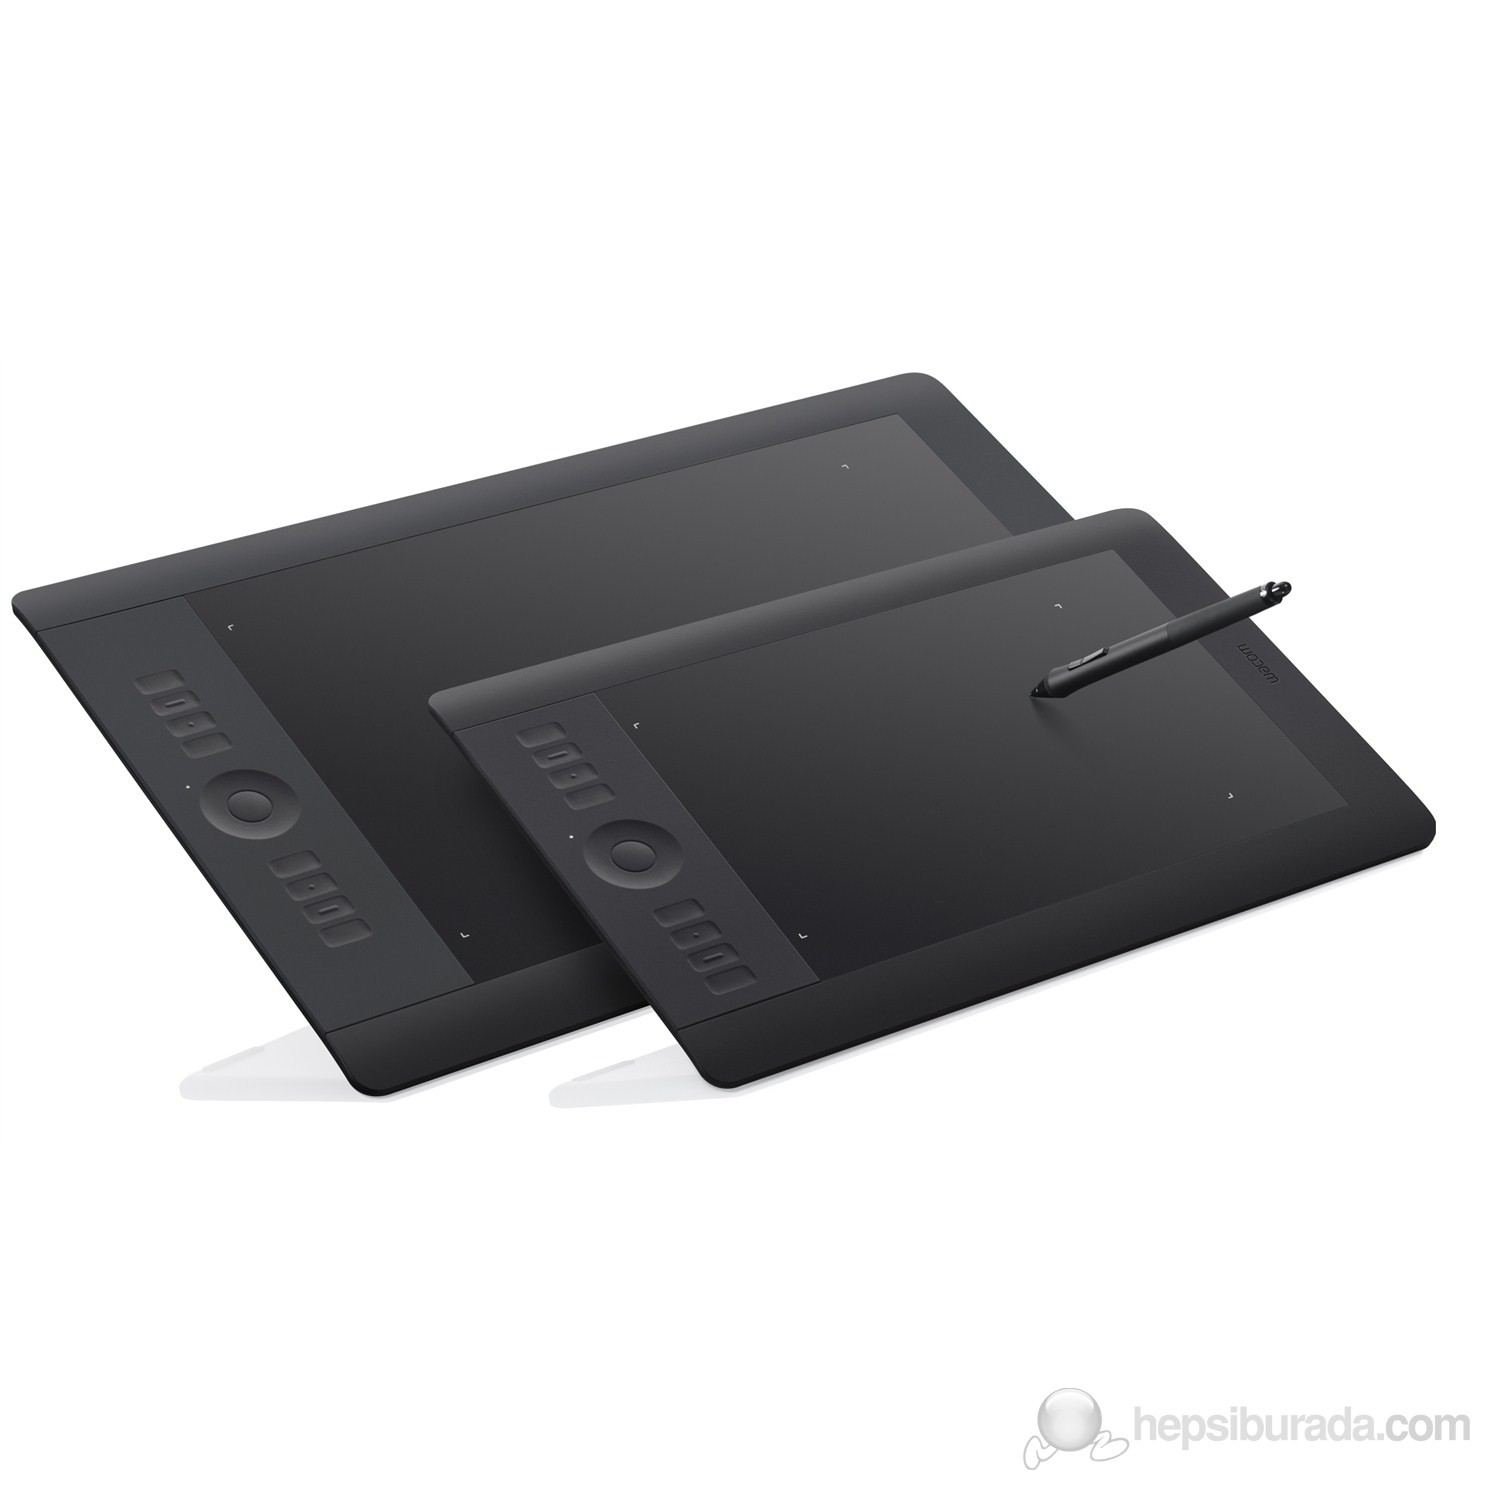 Intuos5 Touch pth-850. Wacom Intuos pth-650. Touch large Tablet. Wacom 5